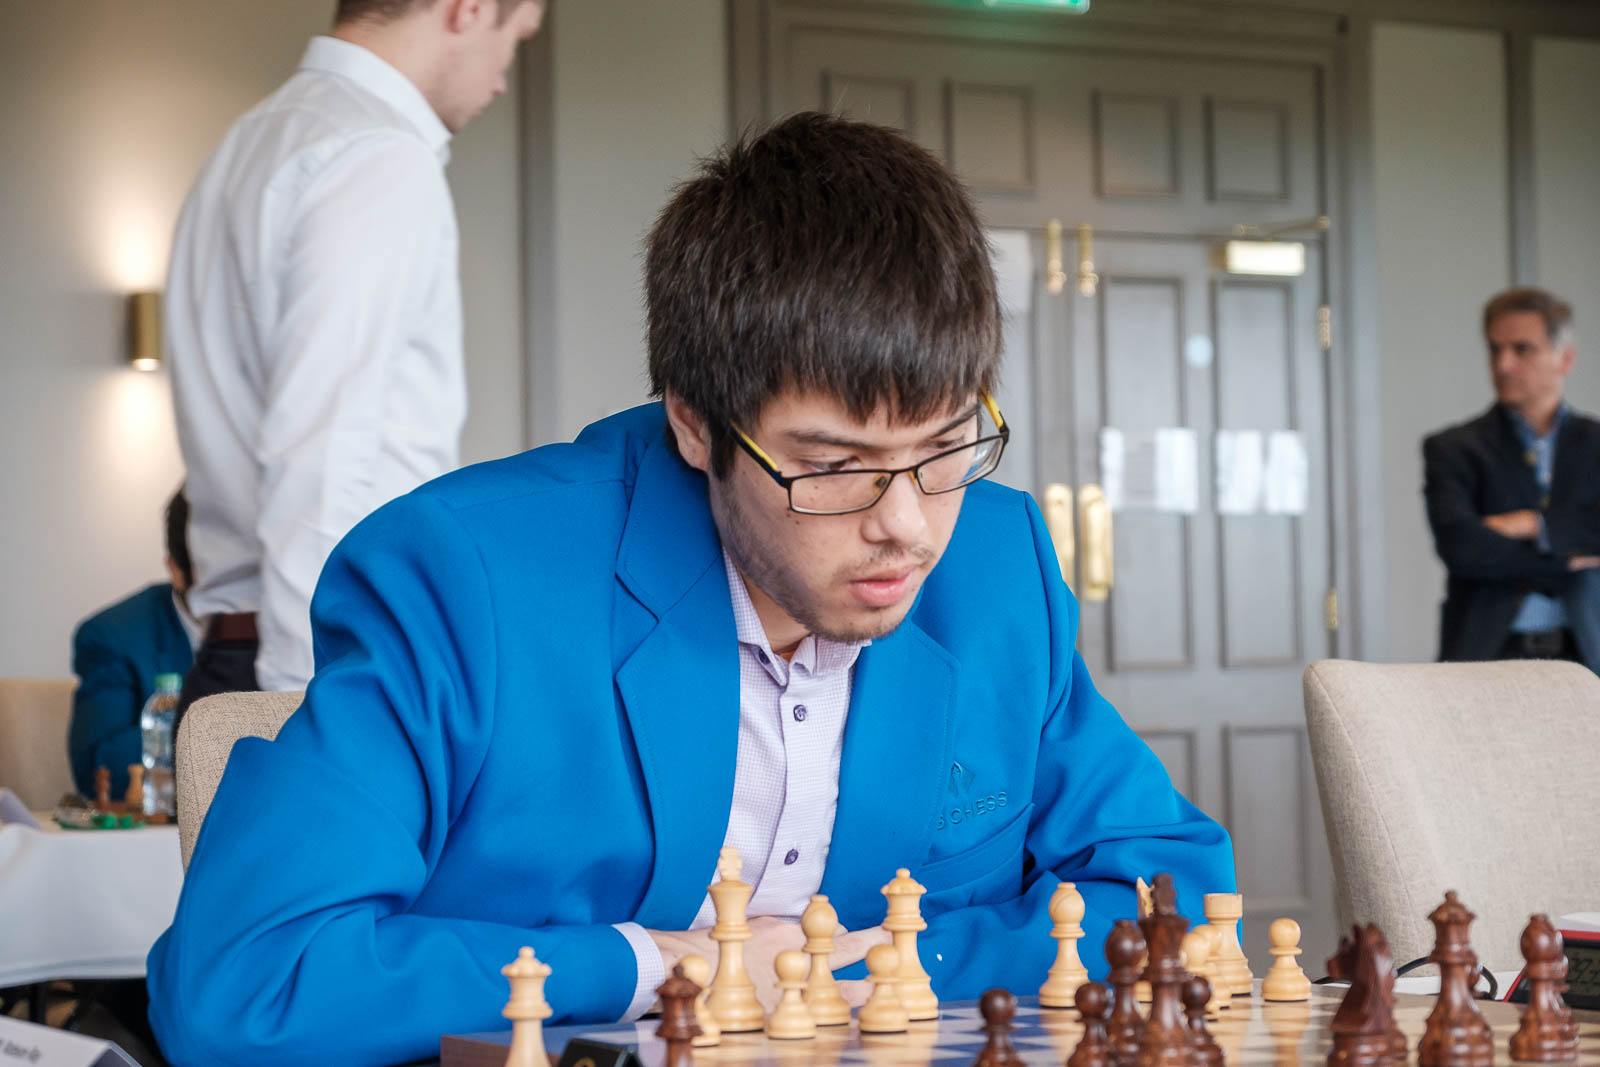 Ray Robson defeats Wesley So and crosses 2700 for the first time!  #USChessChamps Photo: @lennartootes